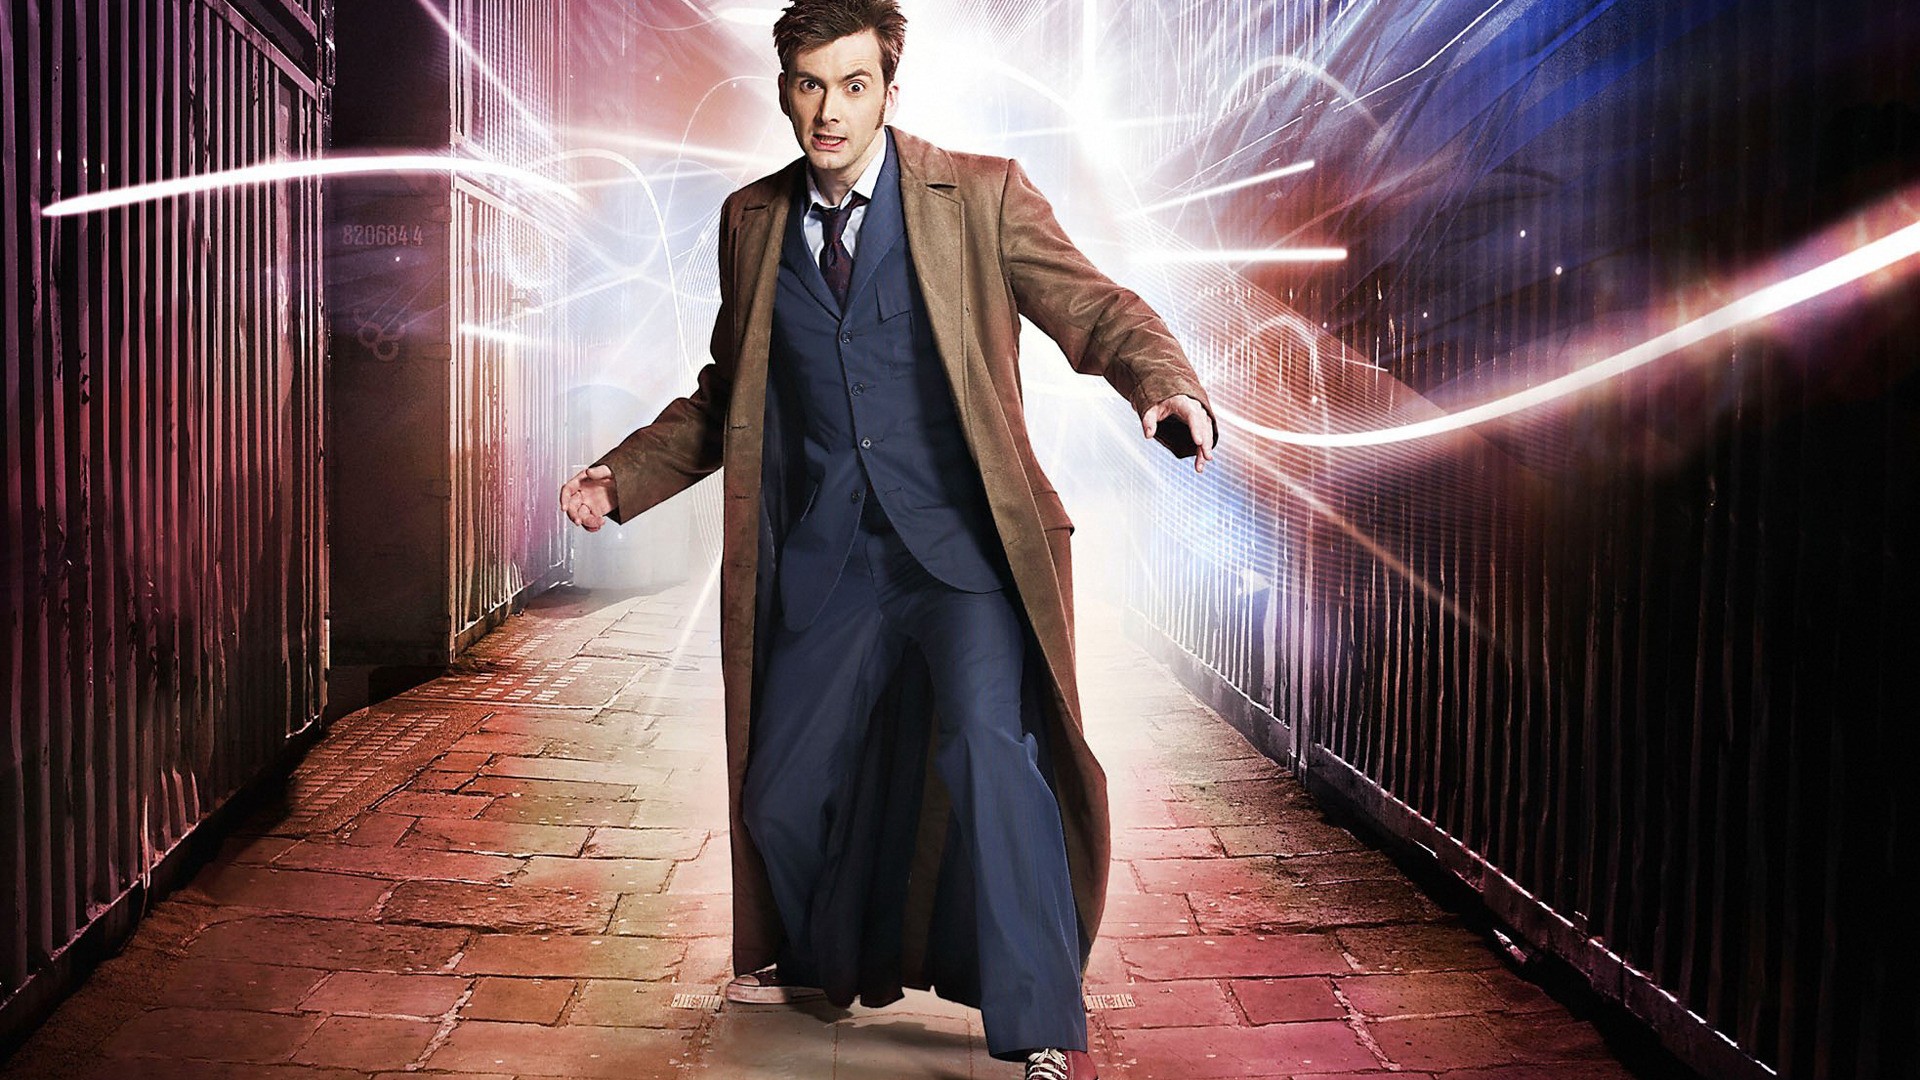 General 1920x1080 Doctor Who The Doctor David Tennant Tenth Doctor Science Fiction Men TV series science fiction